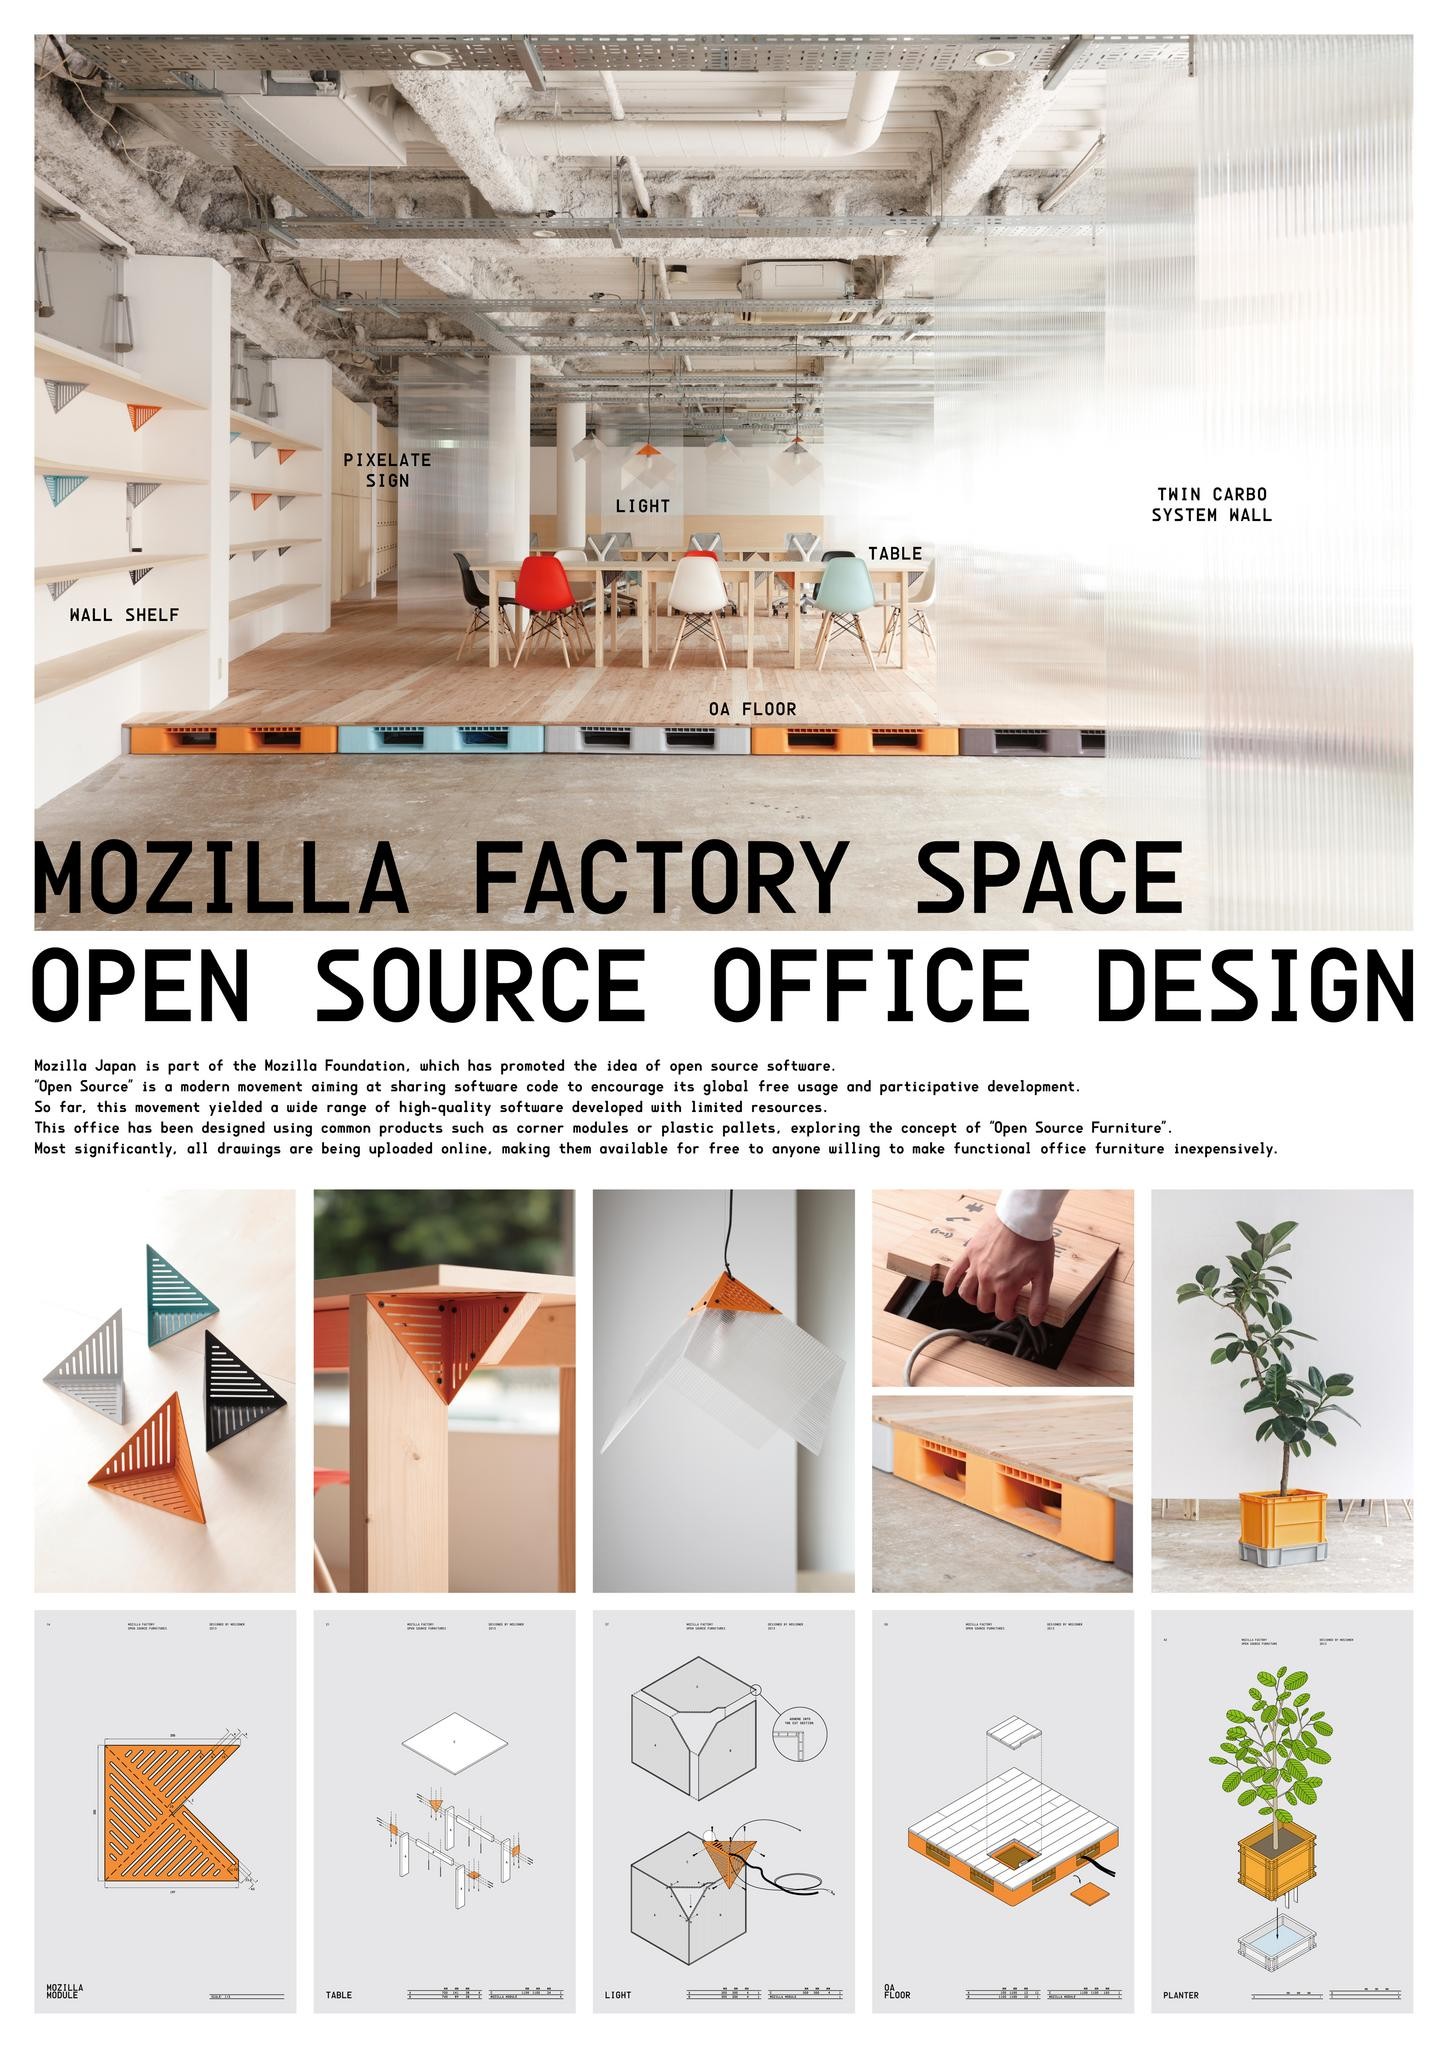 MOZILLA FACTORY SPACE